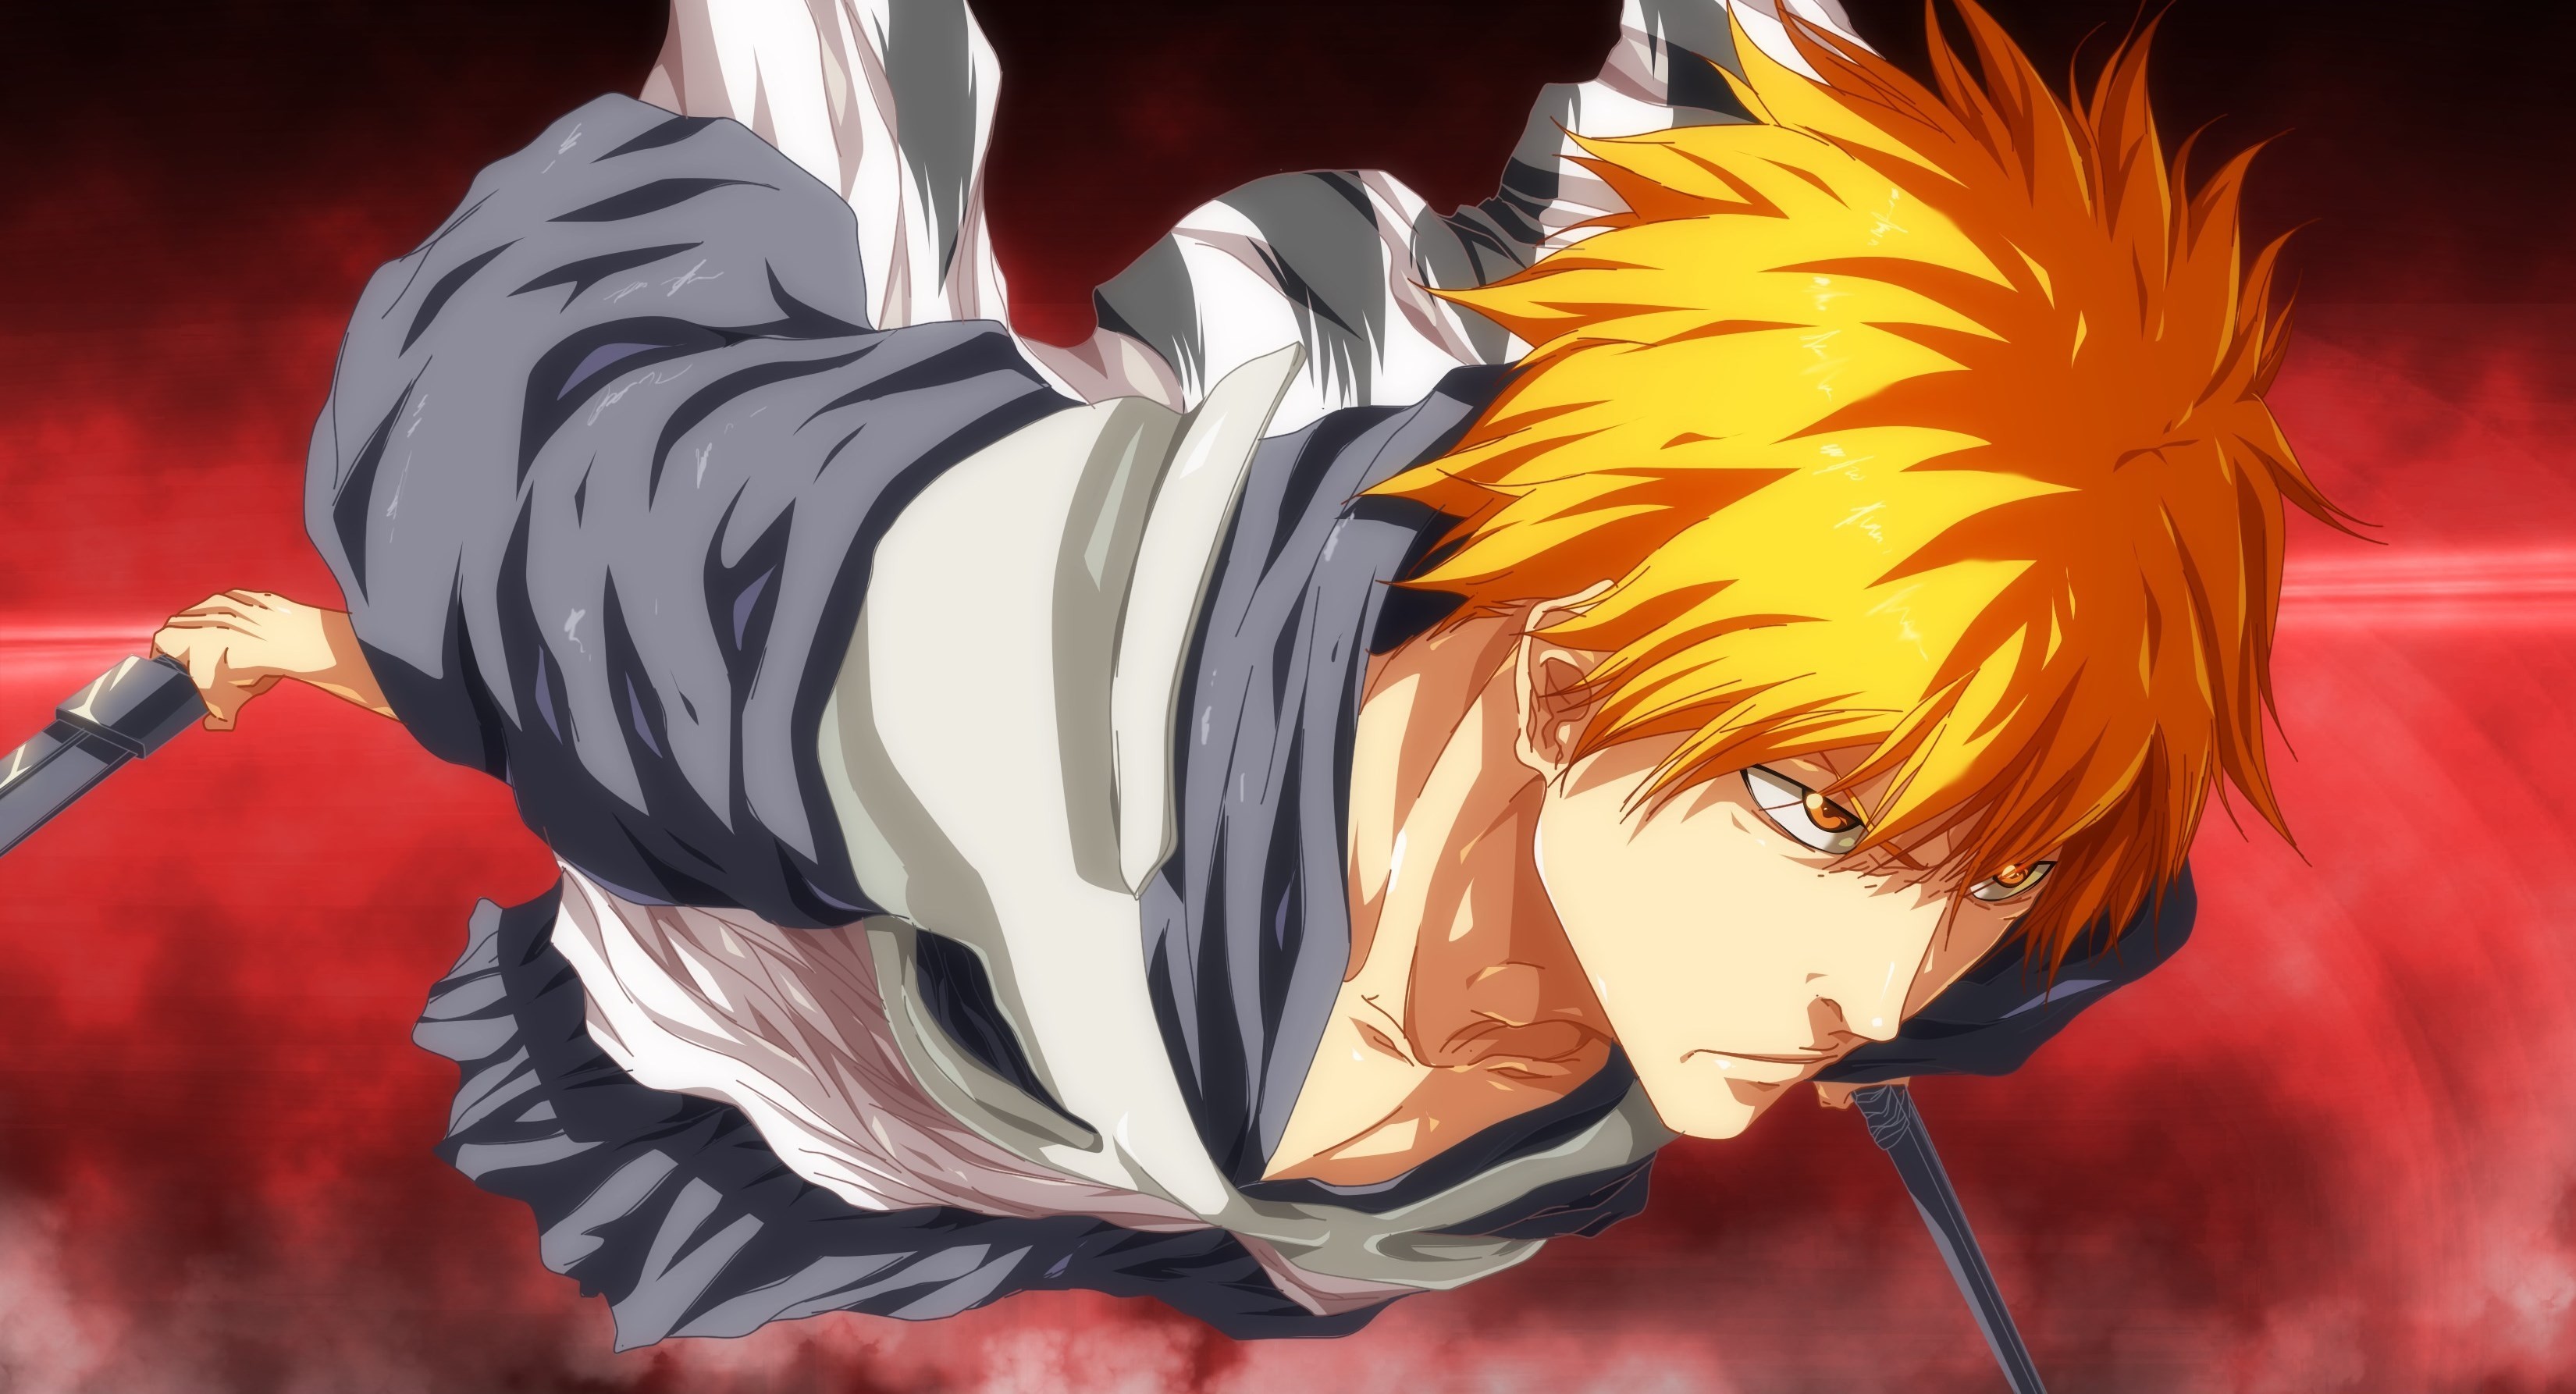 Male Anime Characters With Orange Hair The Girls Beauty I am locket, locata's right hand man. the girls beauty blogger